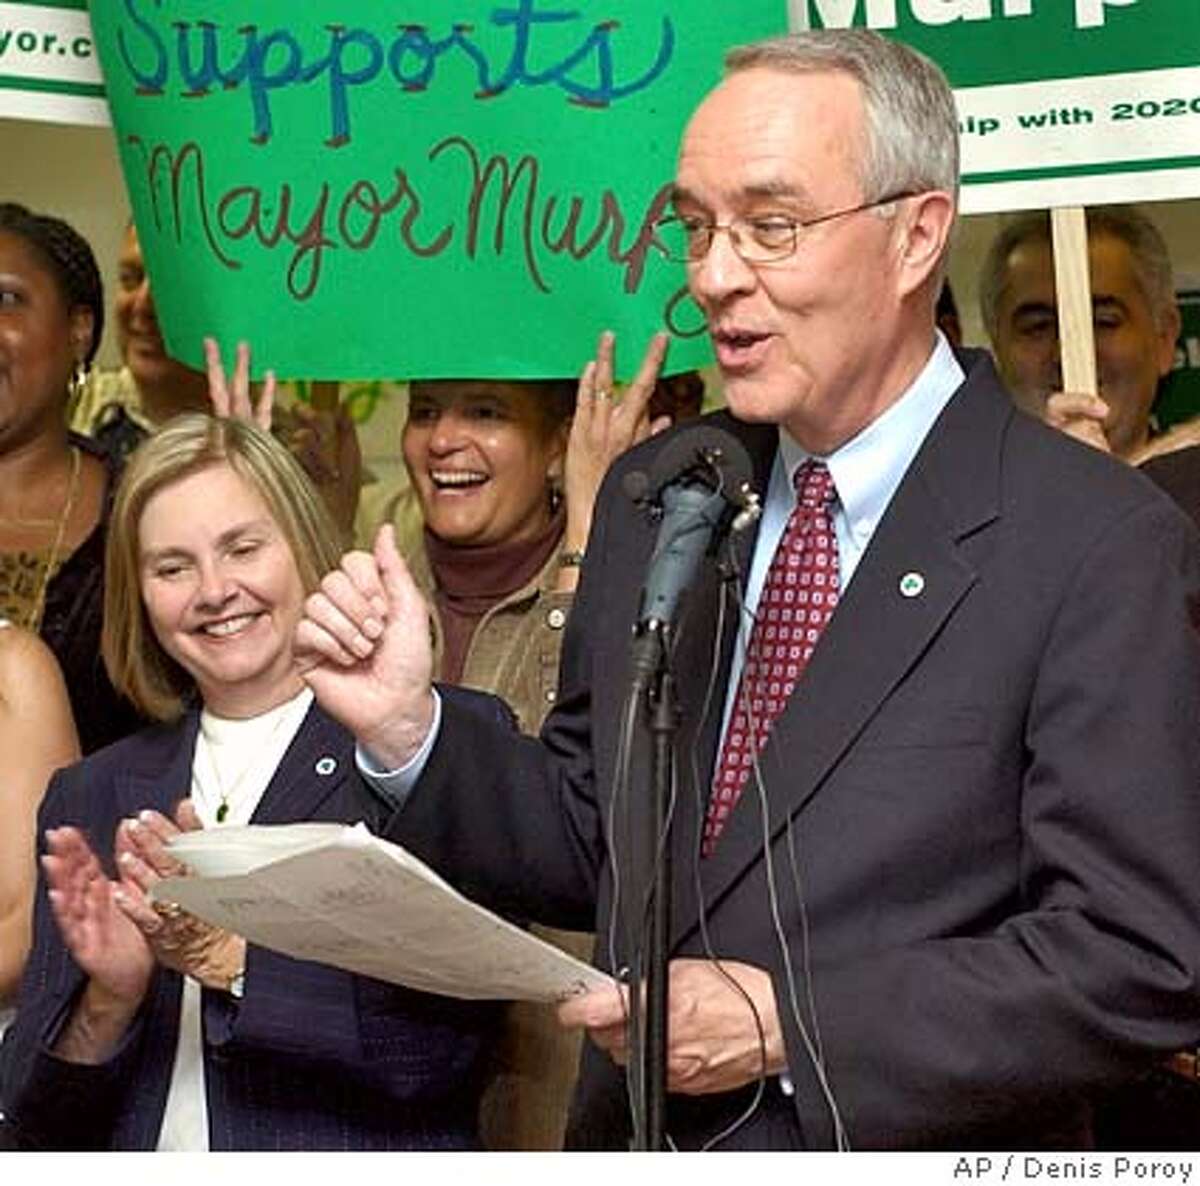 San Diego Mayor Dick Murphy, right, speaks as his wife Jan Murphy, left, looks on at a news conference Friday Nov. 19, 2004, in San Diego, announcing victory over his opponents, write-in candidate Donna Frye and Ron Roberts, in the San Diego mayors race. Murphy made his announcement after the San Diego registrar of voters finished the vote count with Murphy in the lead. His campaign still faces lawsuits challenging the election. (AP Photo/Denis Poroy) Metro#Metro#Chronicle#11/23/2004#ALL#5star#b2#0422476270